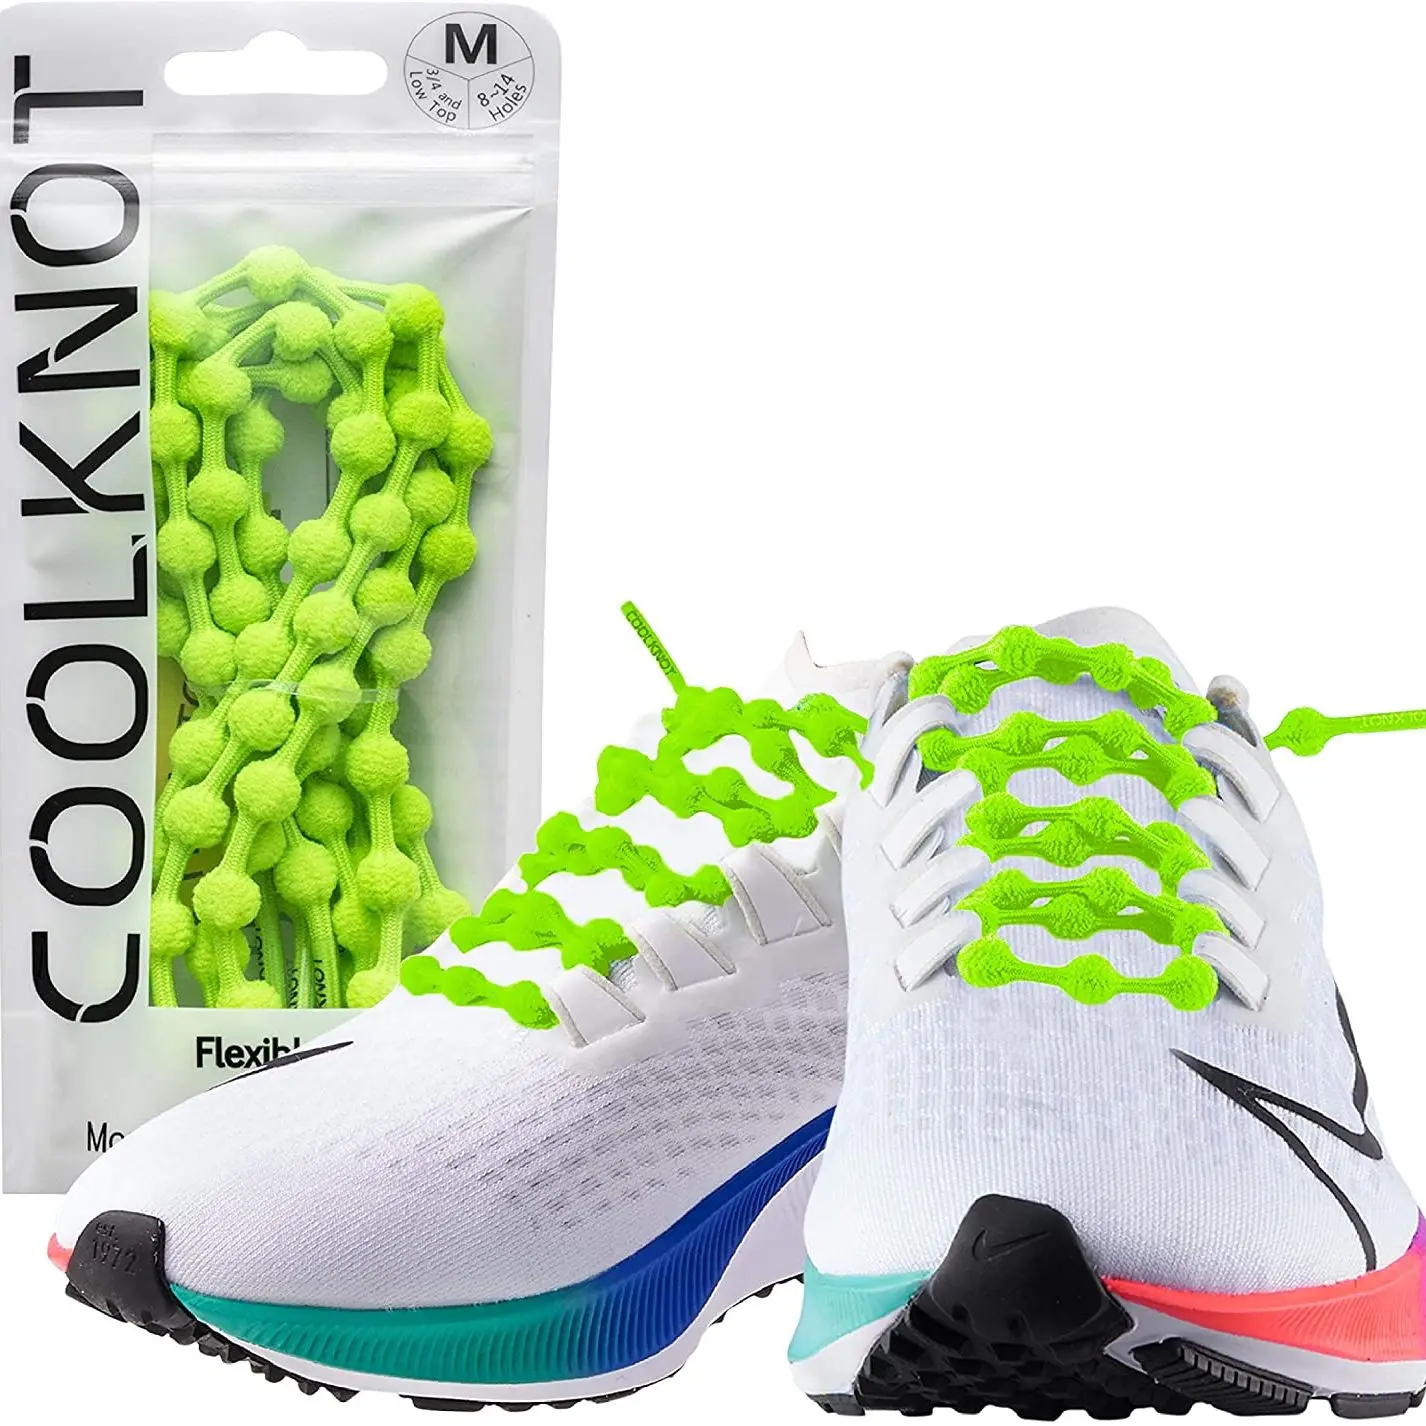 COOLKNOT elastic shoelaces high-end elastic double spandex made shoelaces Golf/sports shoes shoelace